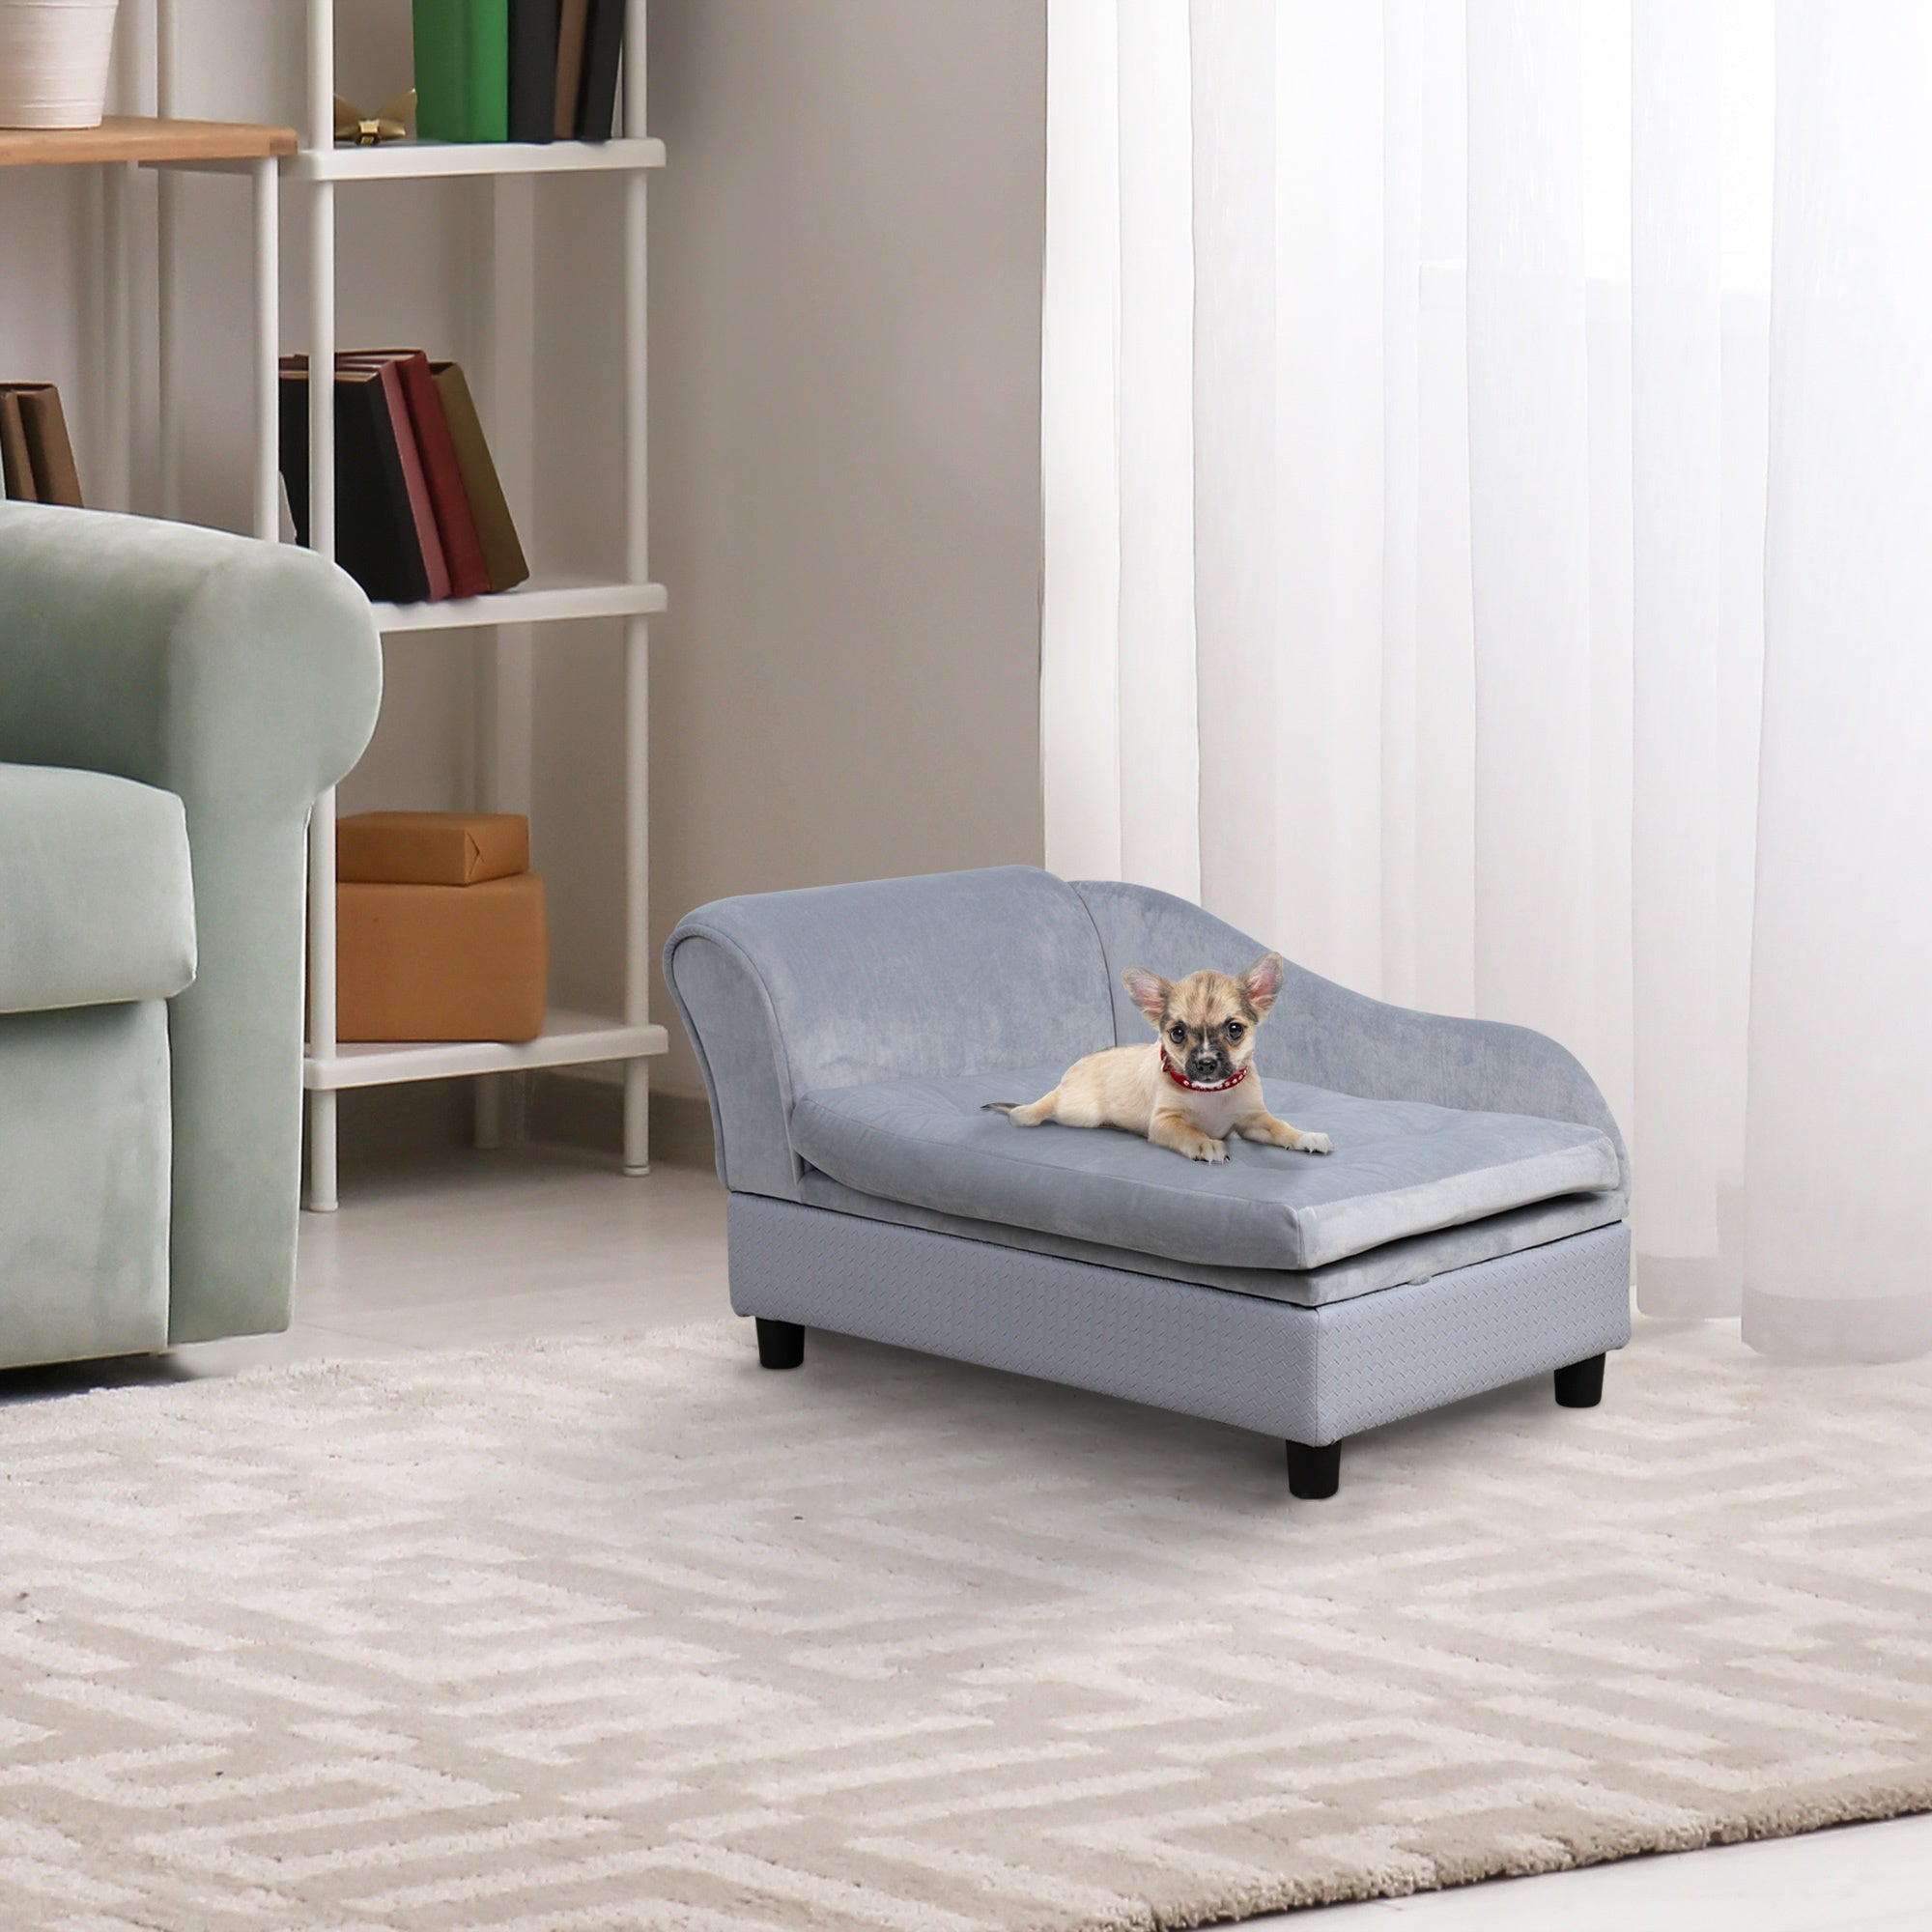 Dogs Elevated Plush Sponge Chaise Lounge Bed Light Blue